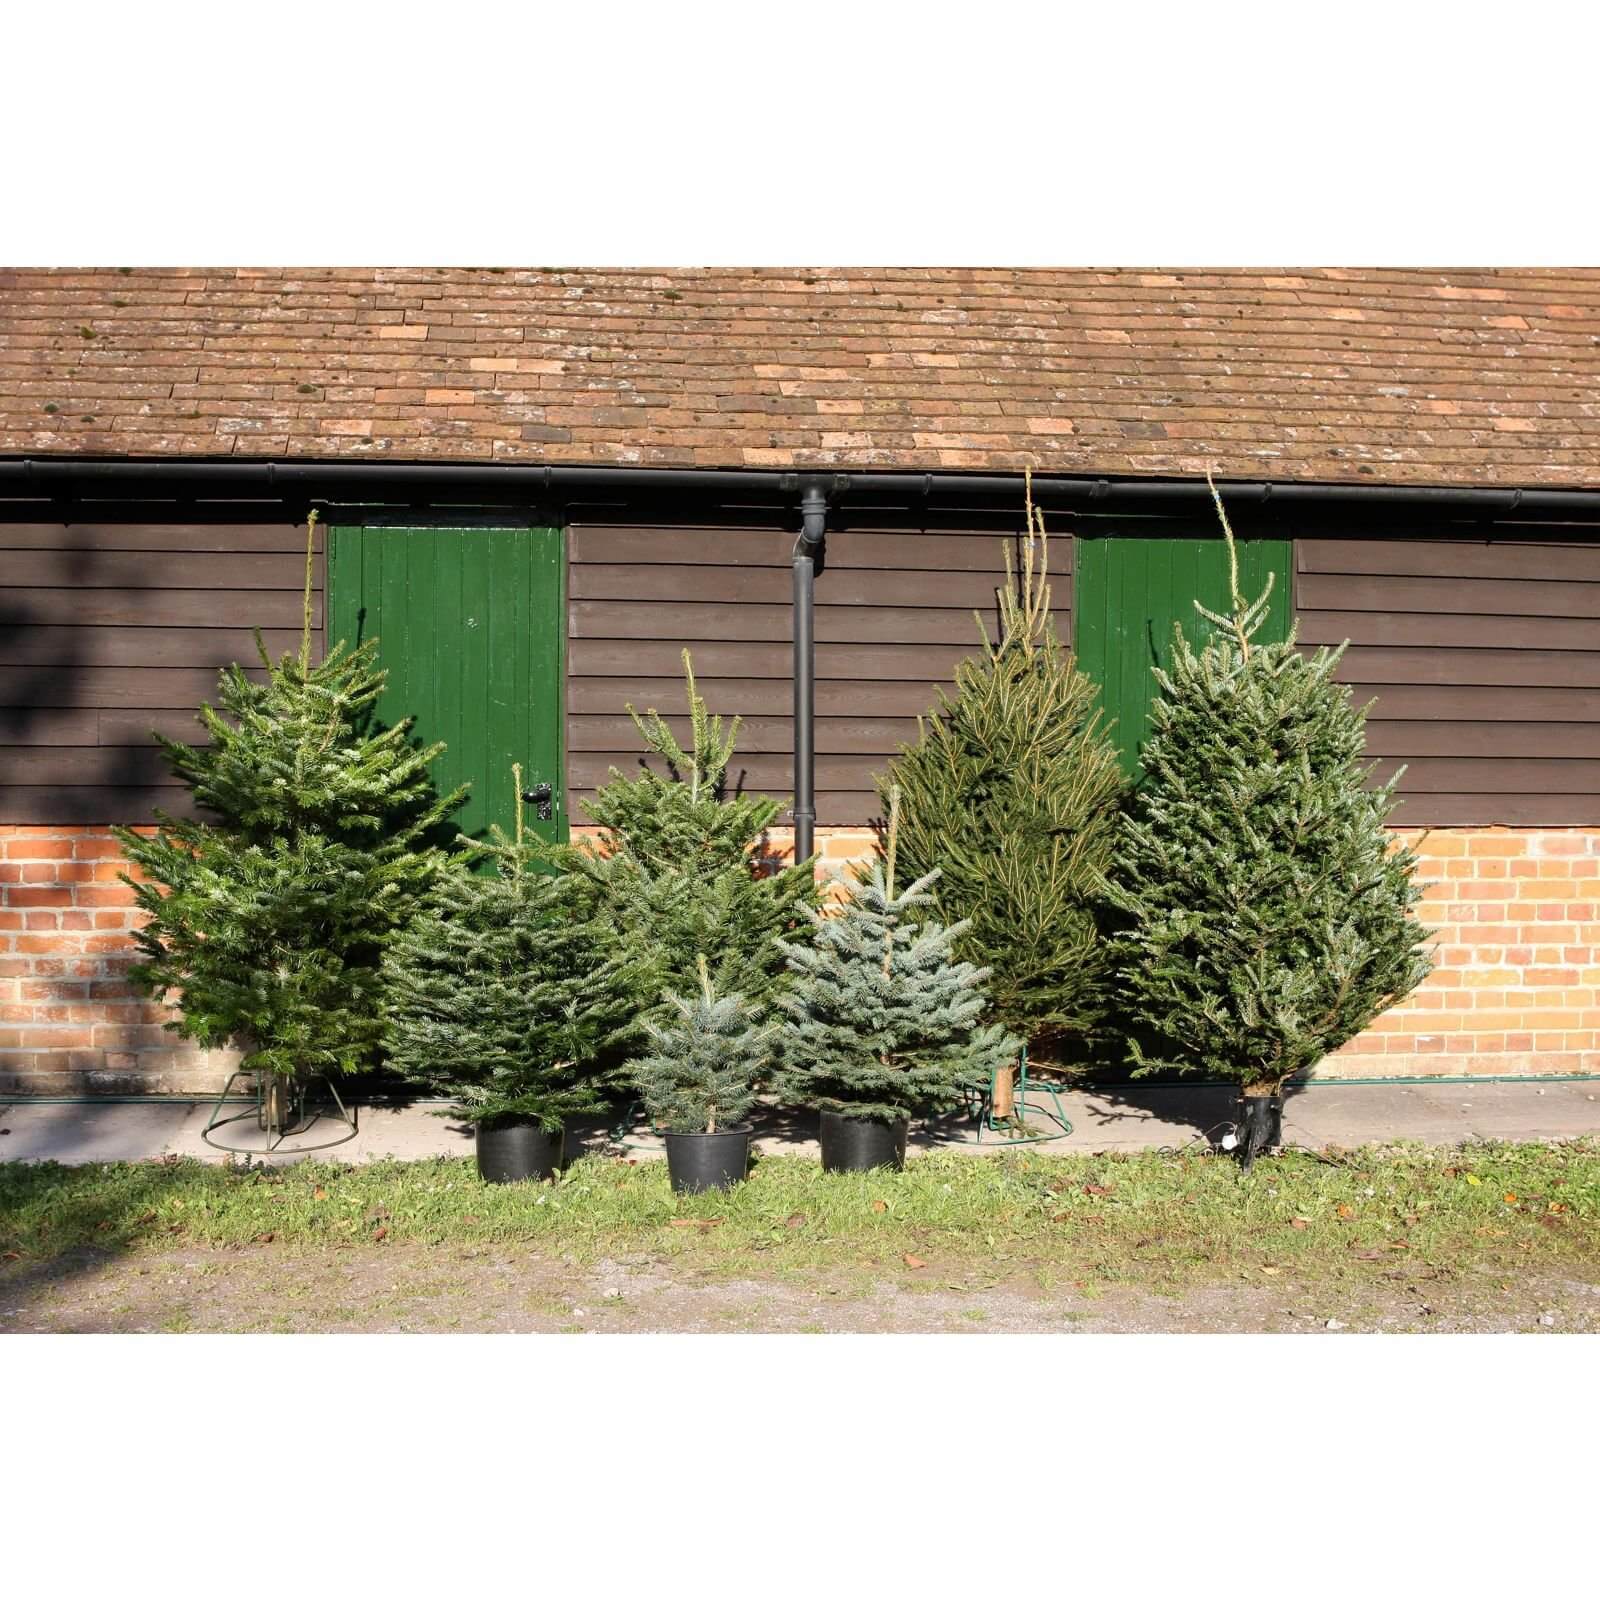 80-100cm (2.5-3ft) Living Pot Grown Blue Spruce Real Christmas Tree